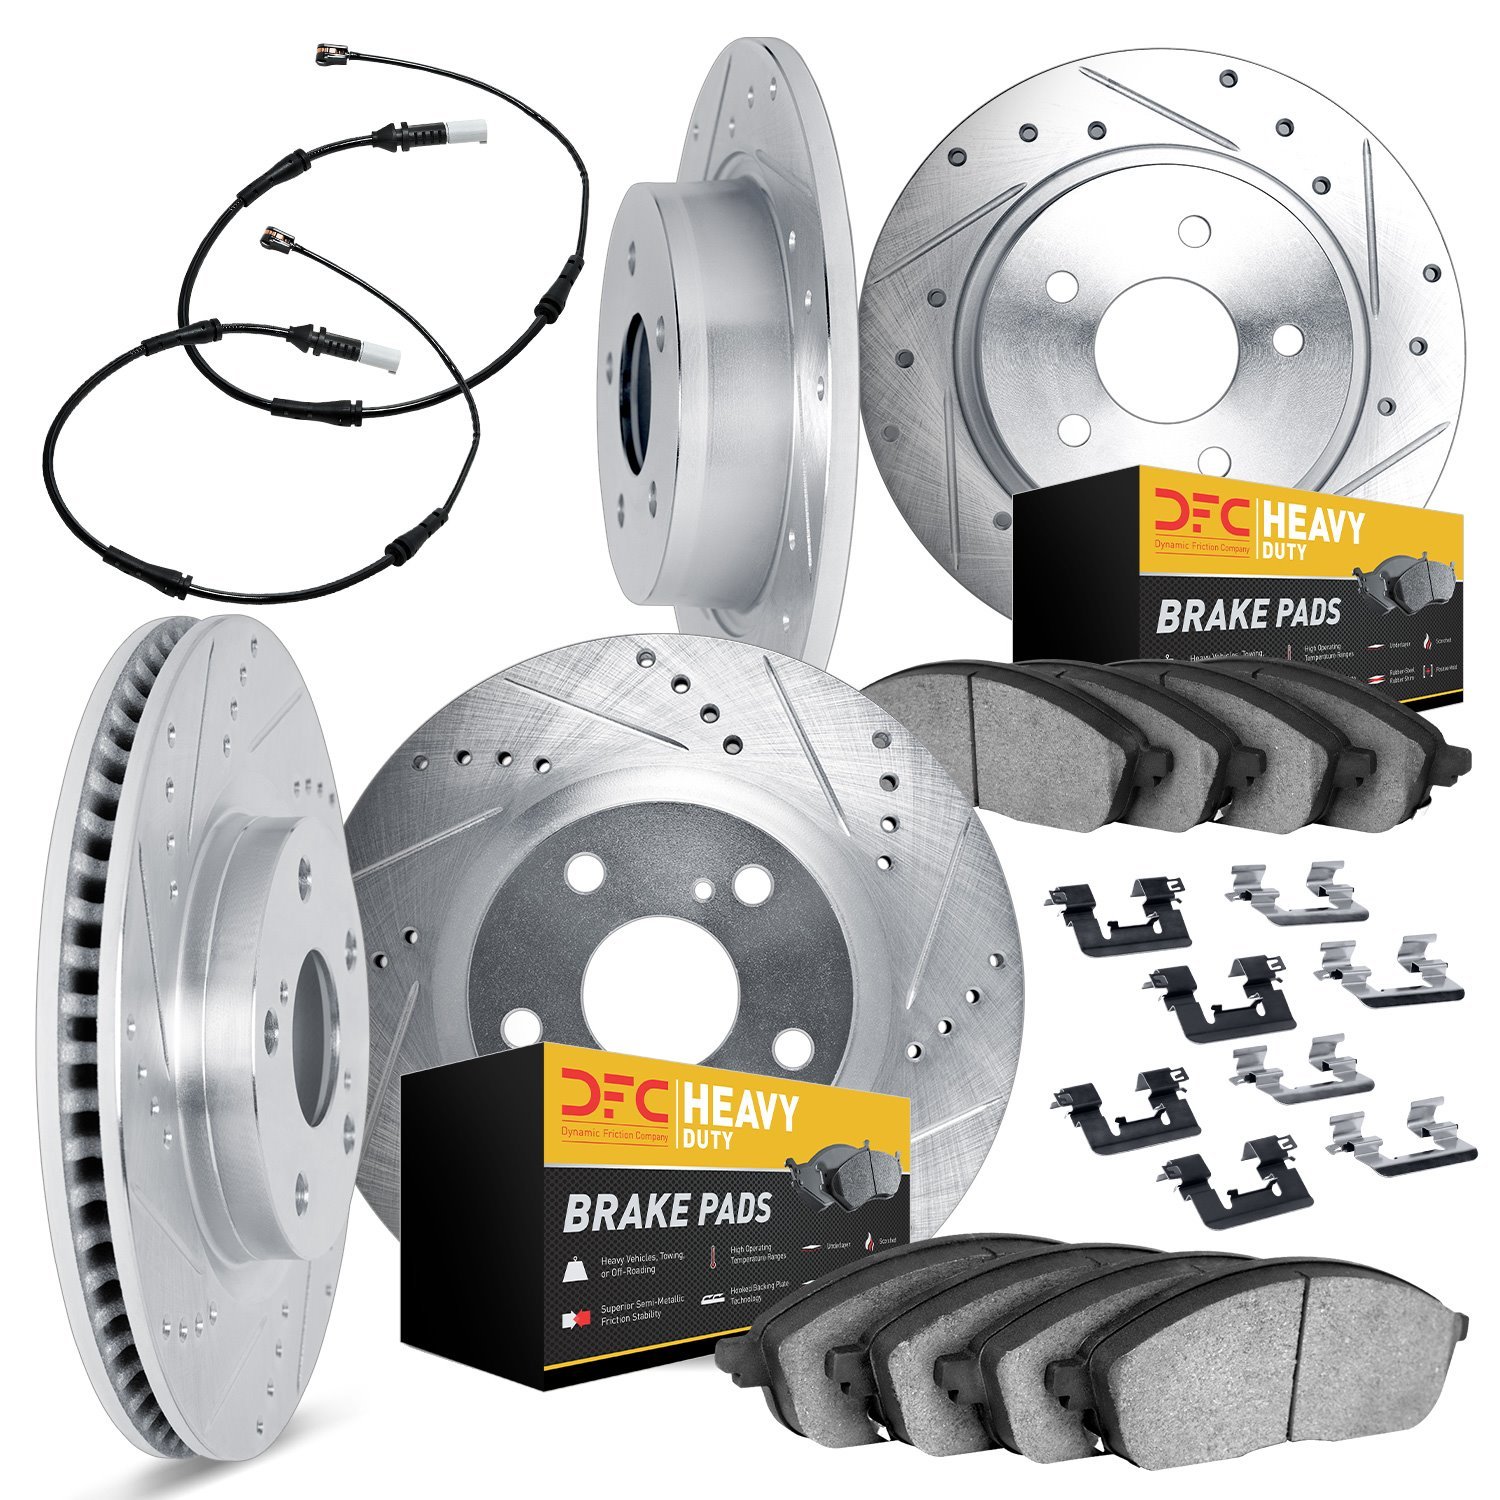 7224-99002 Drilled/Slotted Rotors w/Heavy-Duty Brake Pads/Sensor & Hardware Kit [Silver], Fits Select Ford/Lincoln/Mercury/Mazda